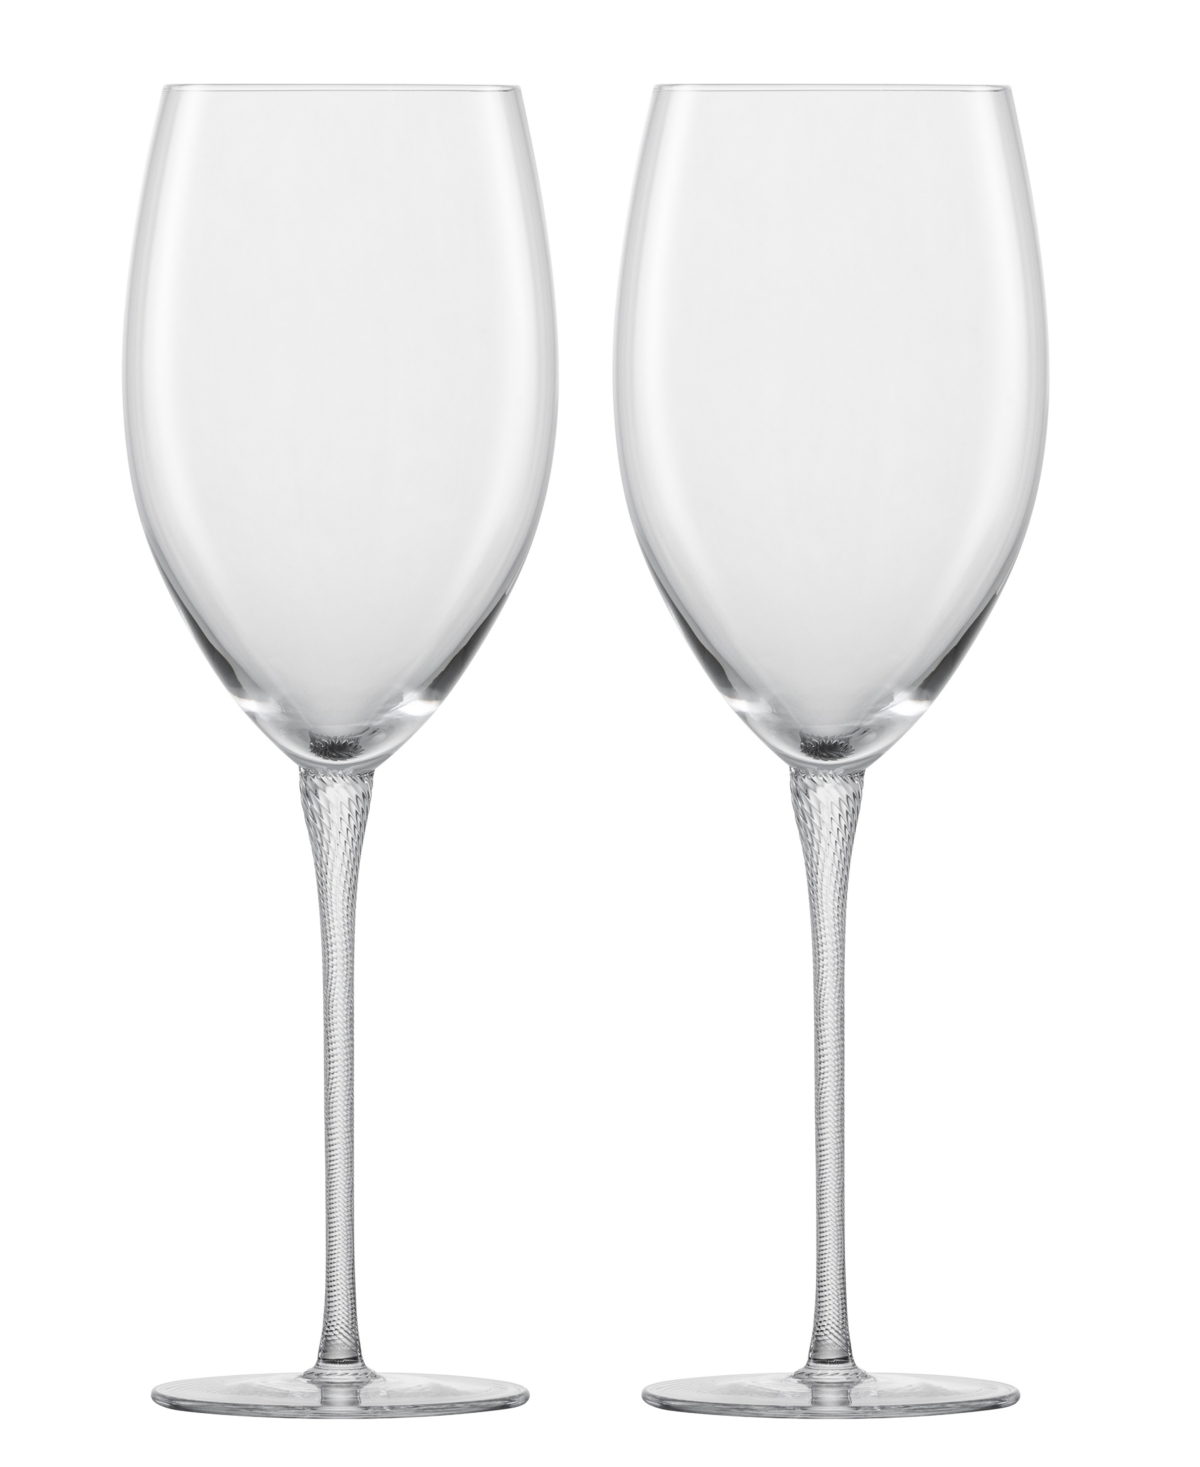 Zwiesel Glas Handmade Highness Cabernet 14.5 Oz, Set Of 2 In Clear